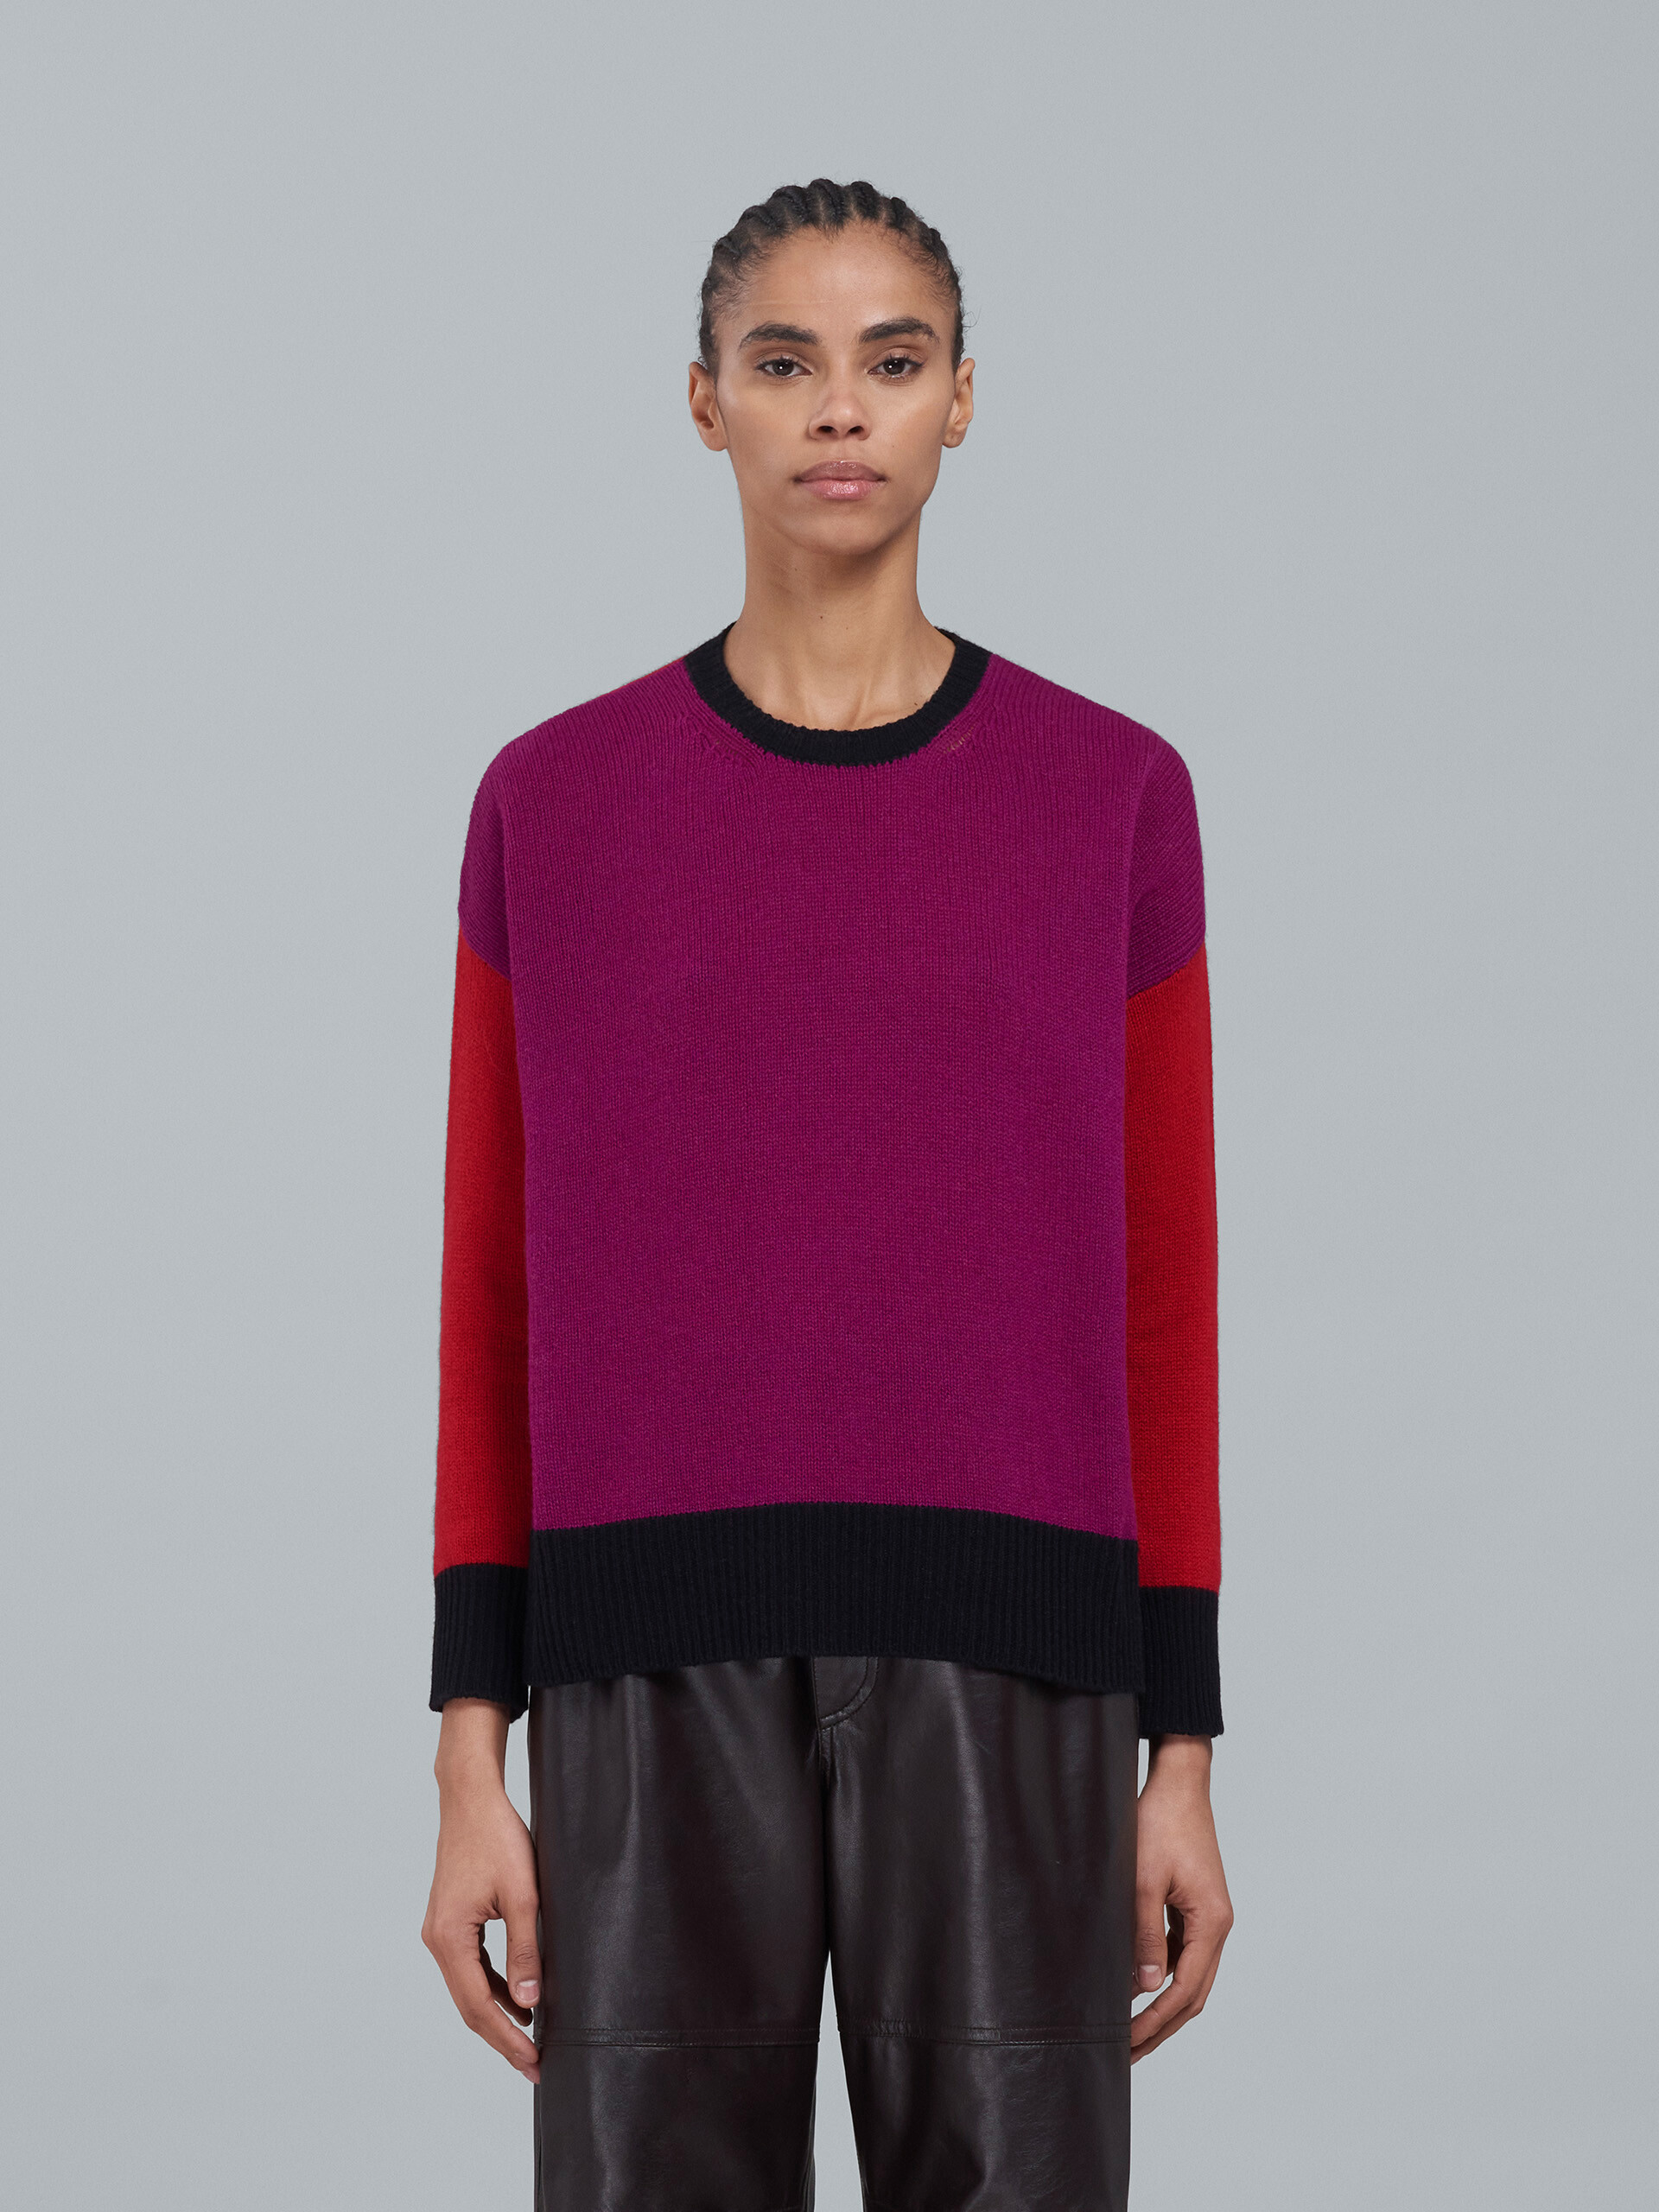 Pink cashmere crewneck sweater - Pullovers - Image 2